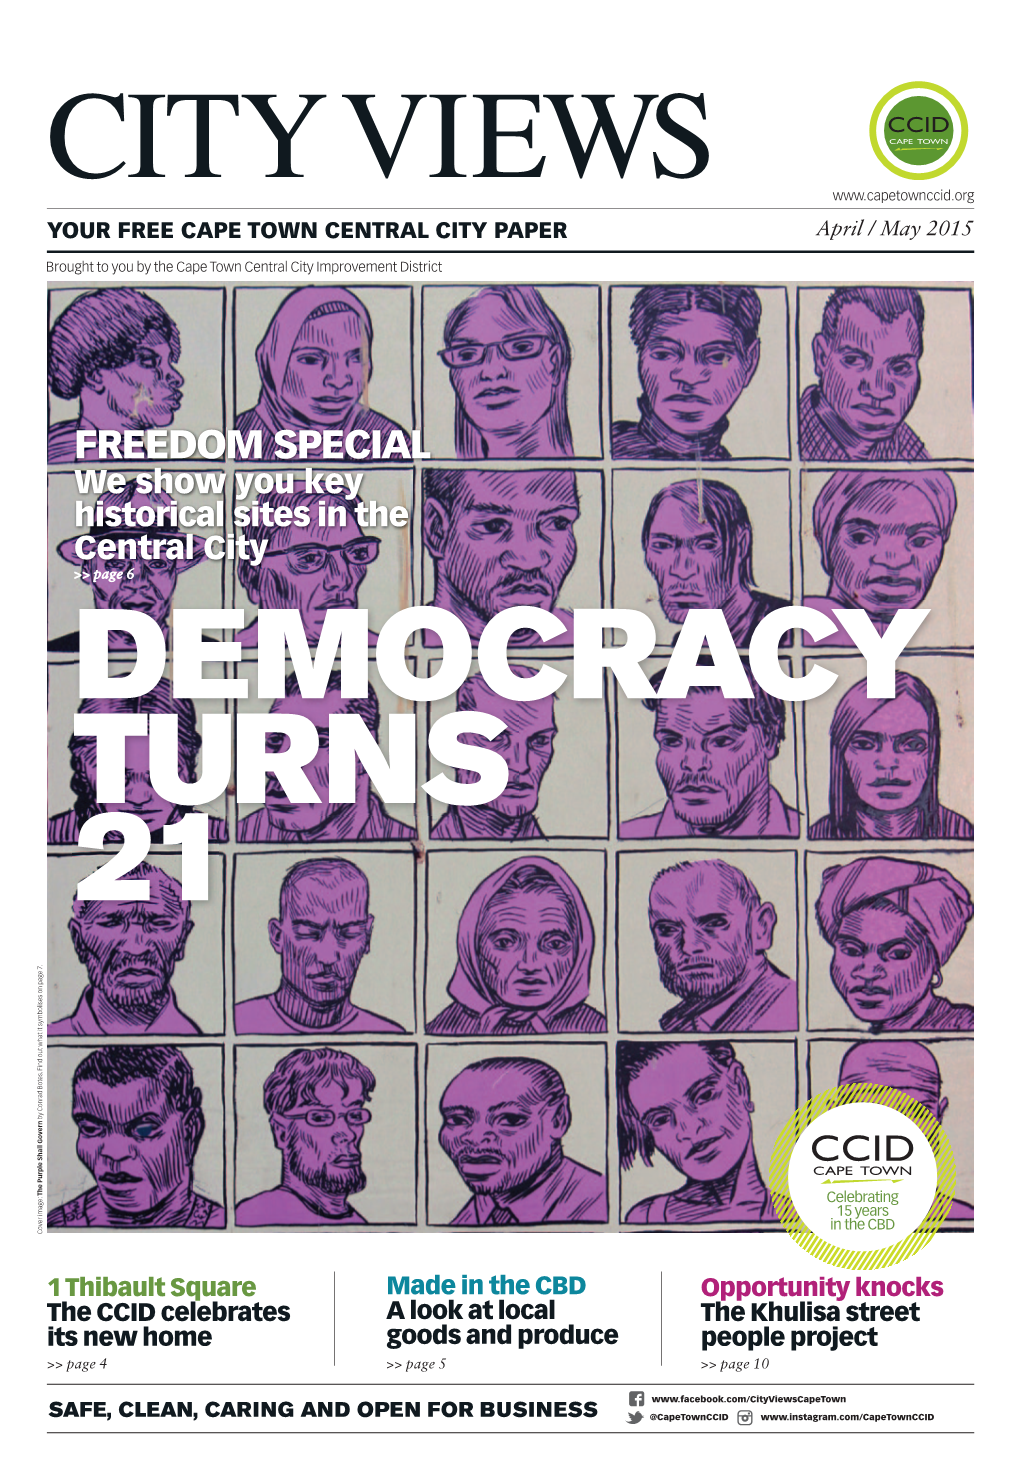 Freedom Special We Show You Key Historical Sites in the Central City >> Page 6 DEMOCRACY TURNS 21